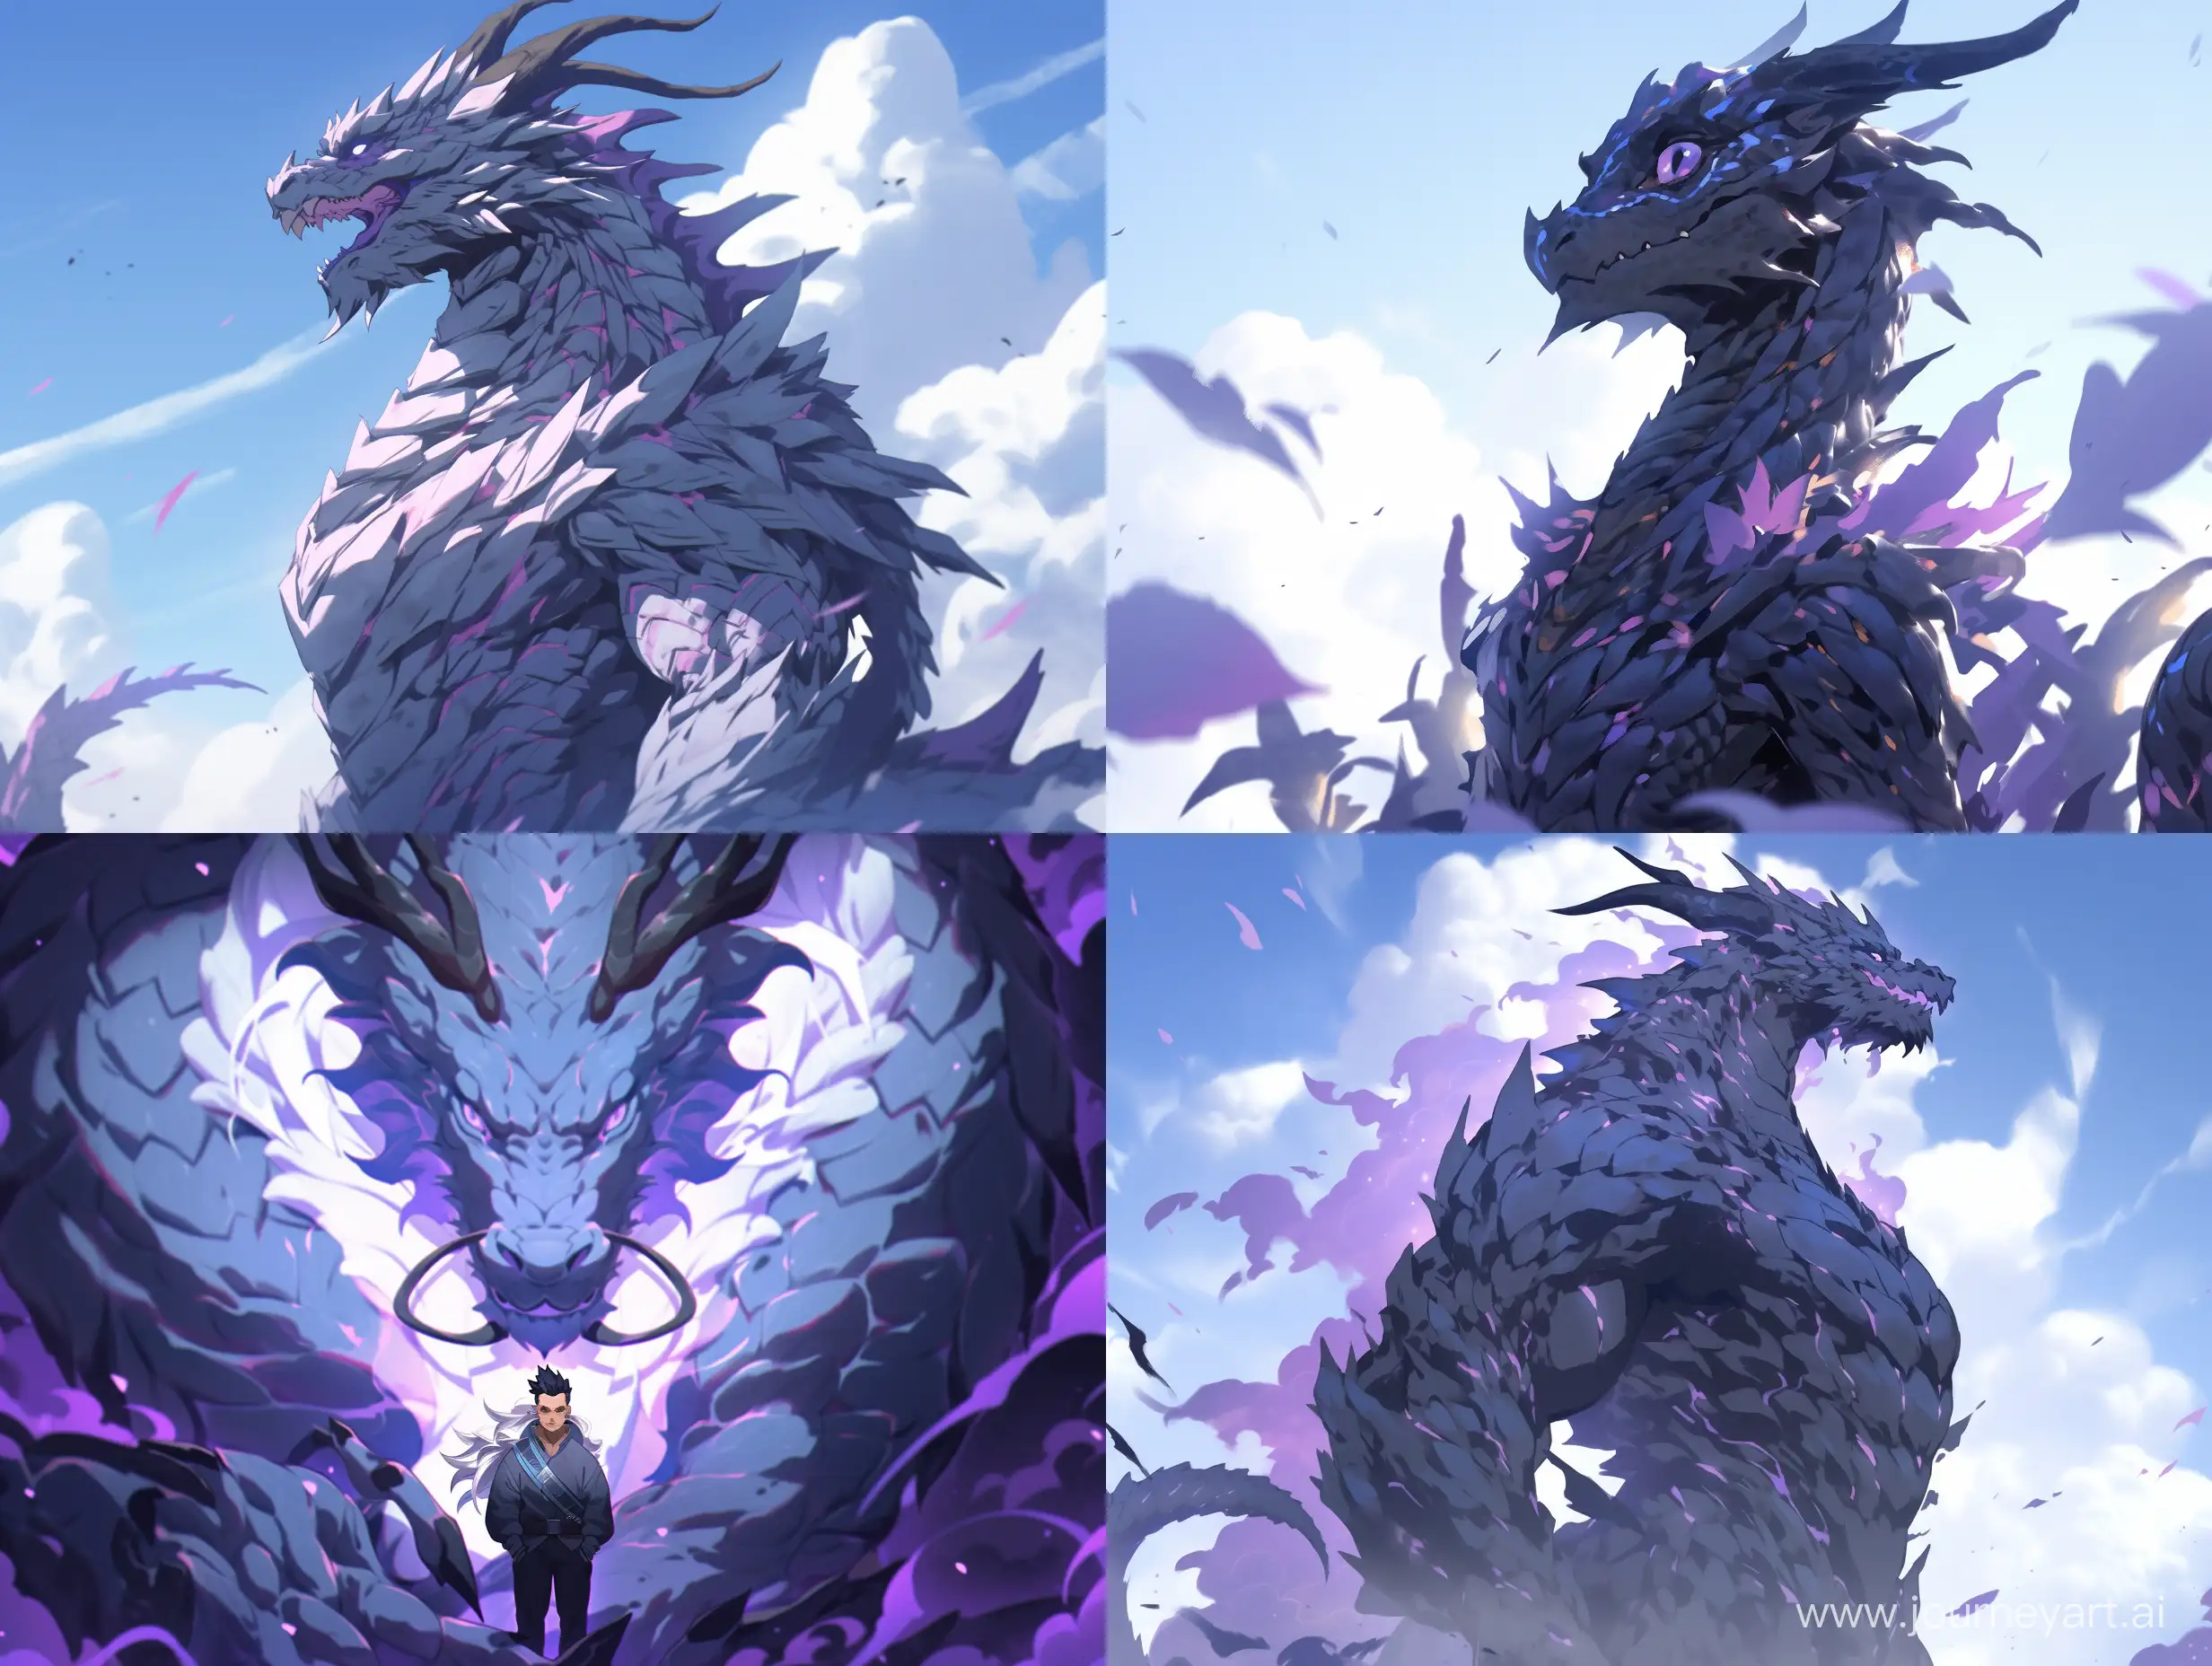 Majestic-Purple-Dragon-with-Muscular-Anthropomorphic-Features